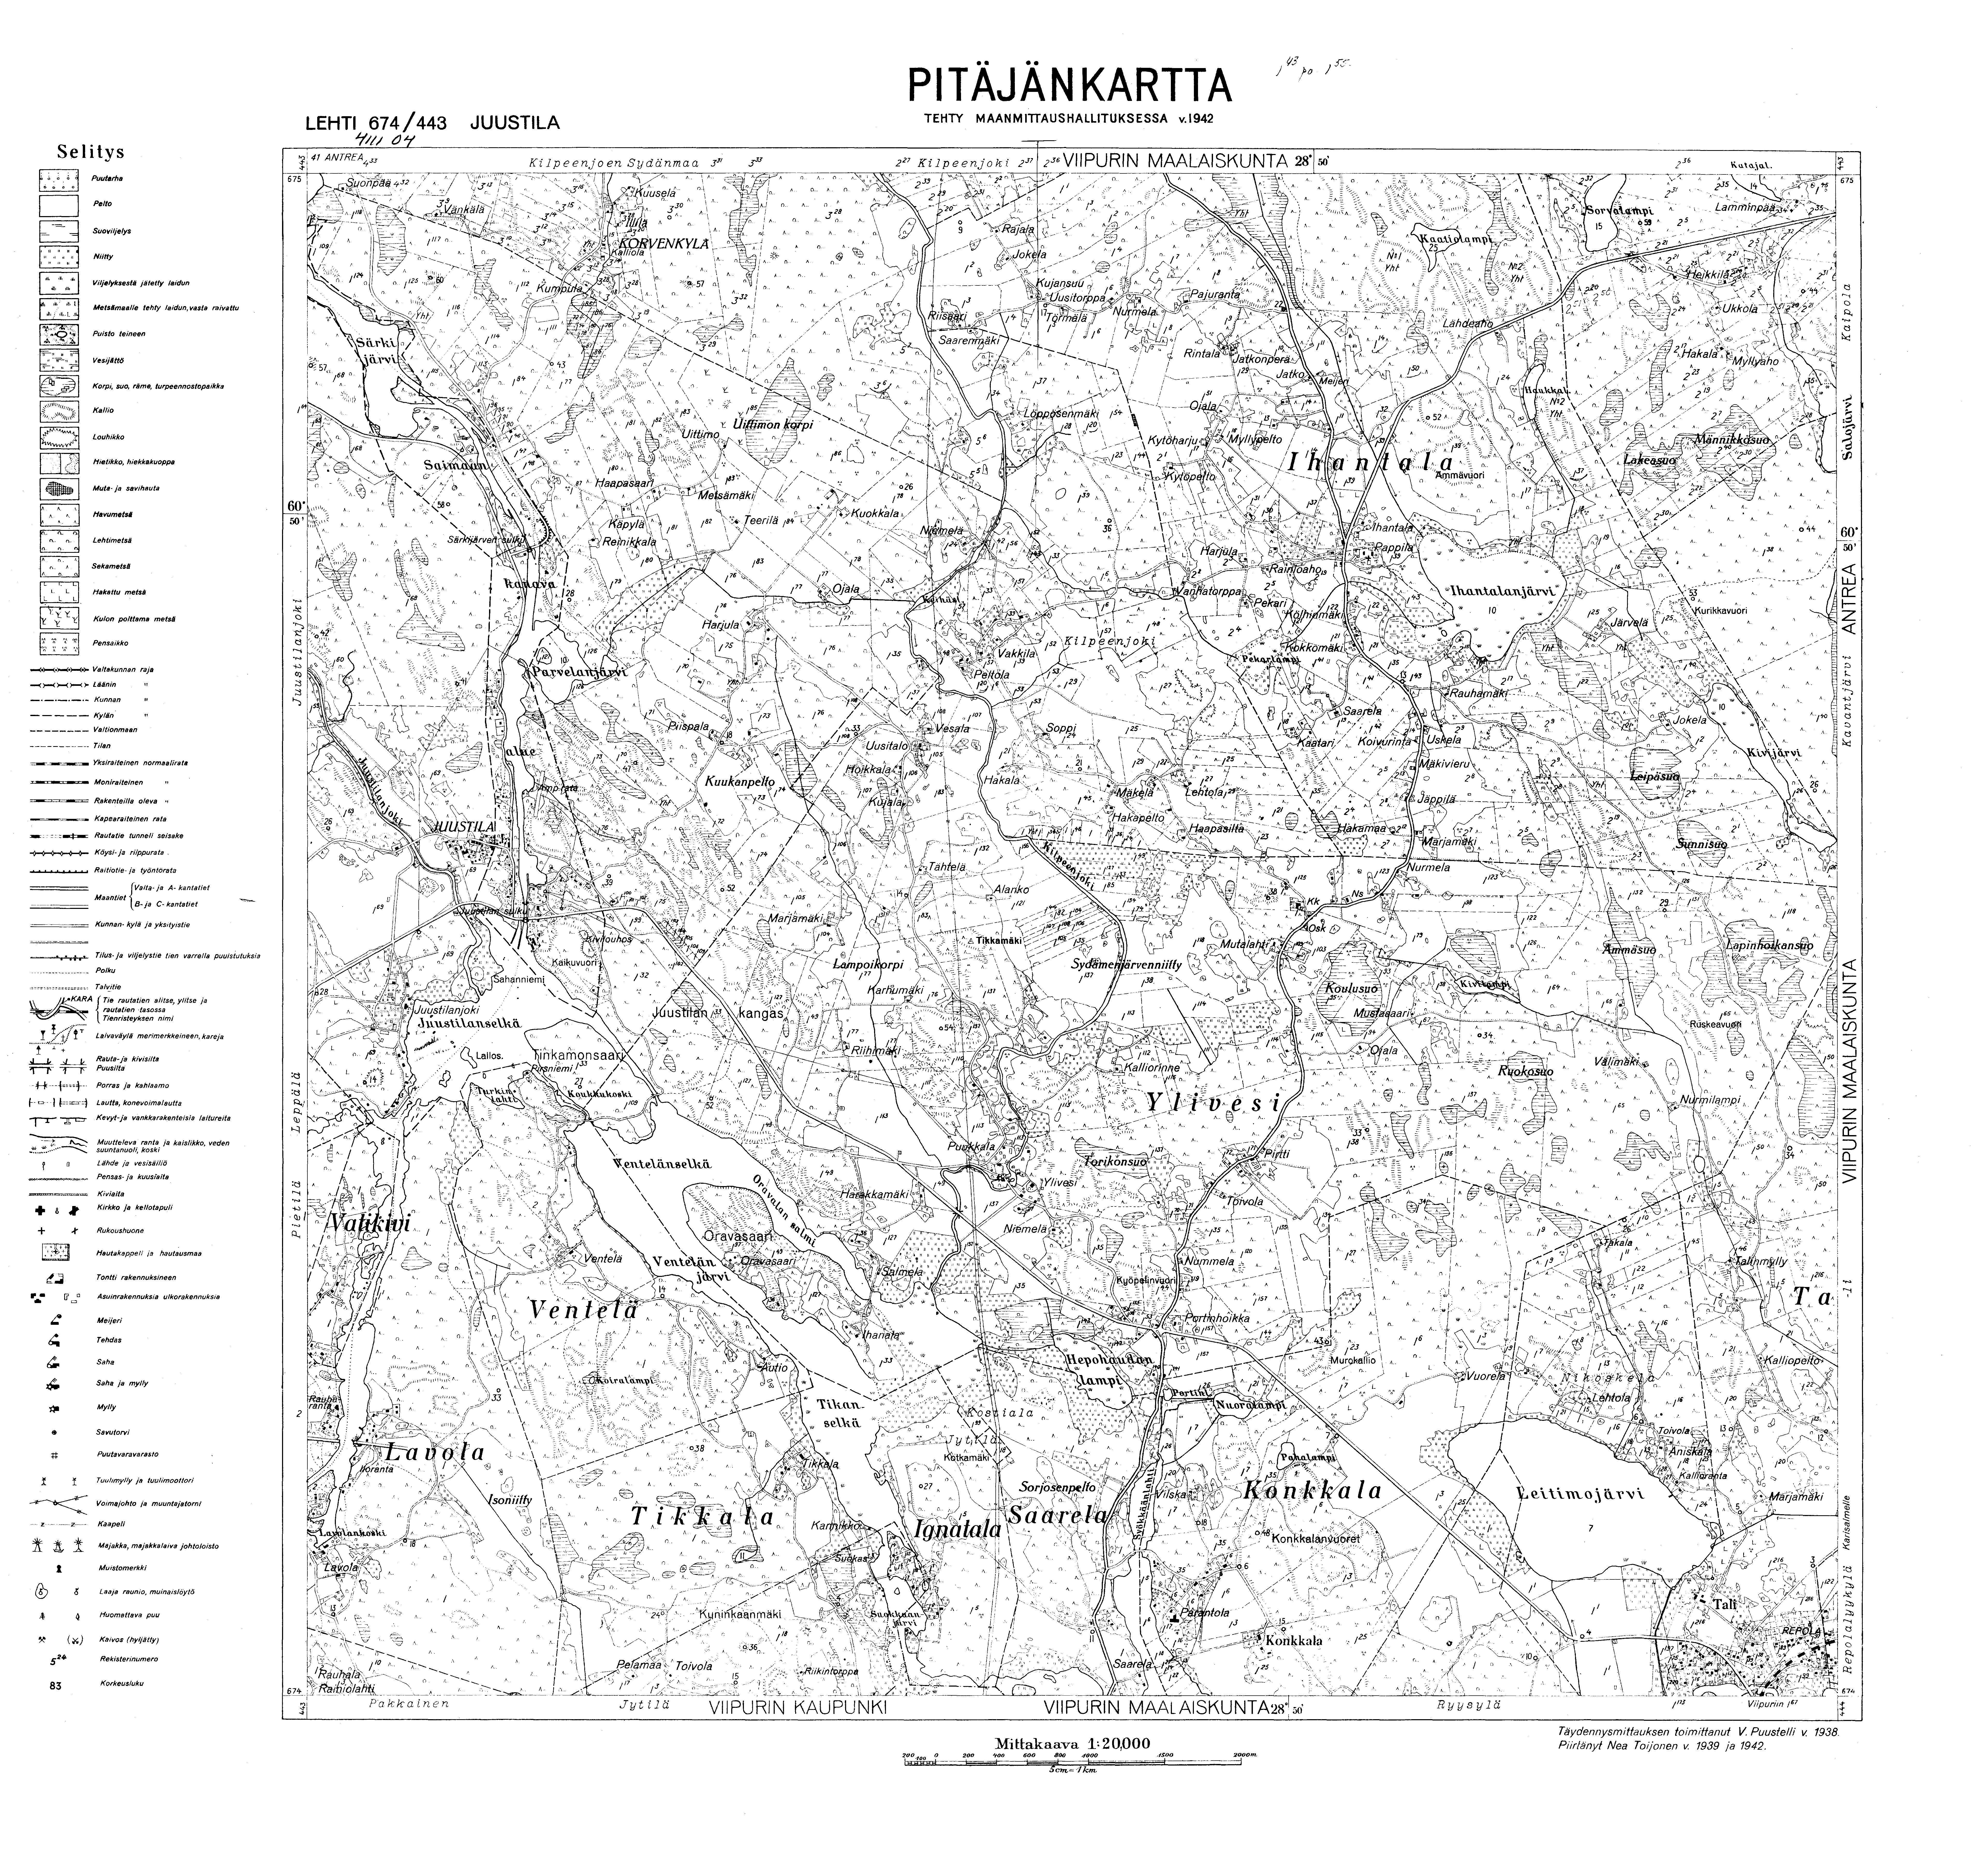 Brusnitšnoje. Juustila. Pitäjänkartta 411104. Parish map from 1942. Use the zooming tool to explore in higher level of detail. Obtain as a quality print or high resolution image